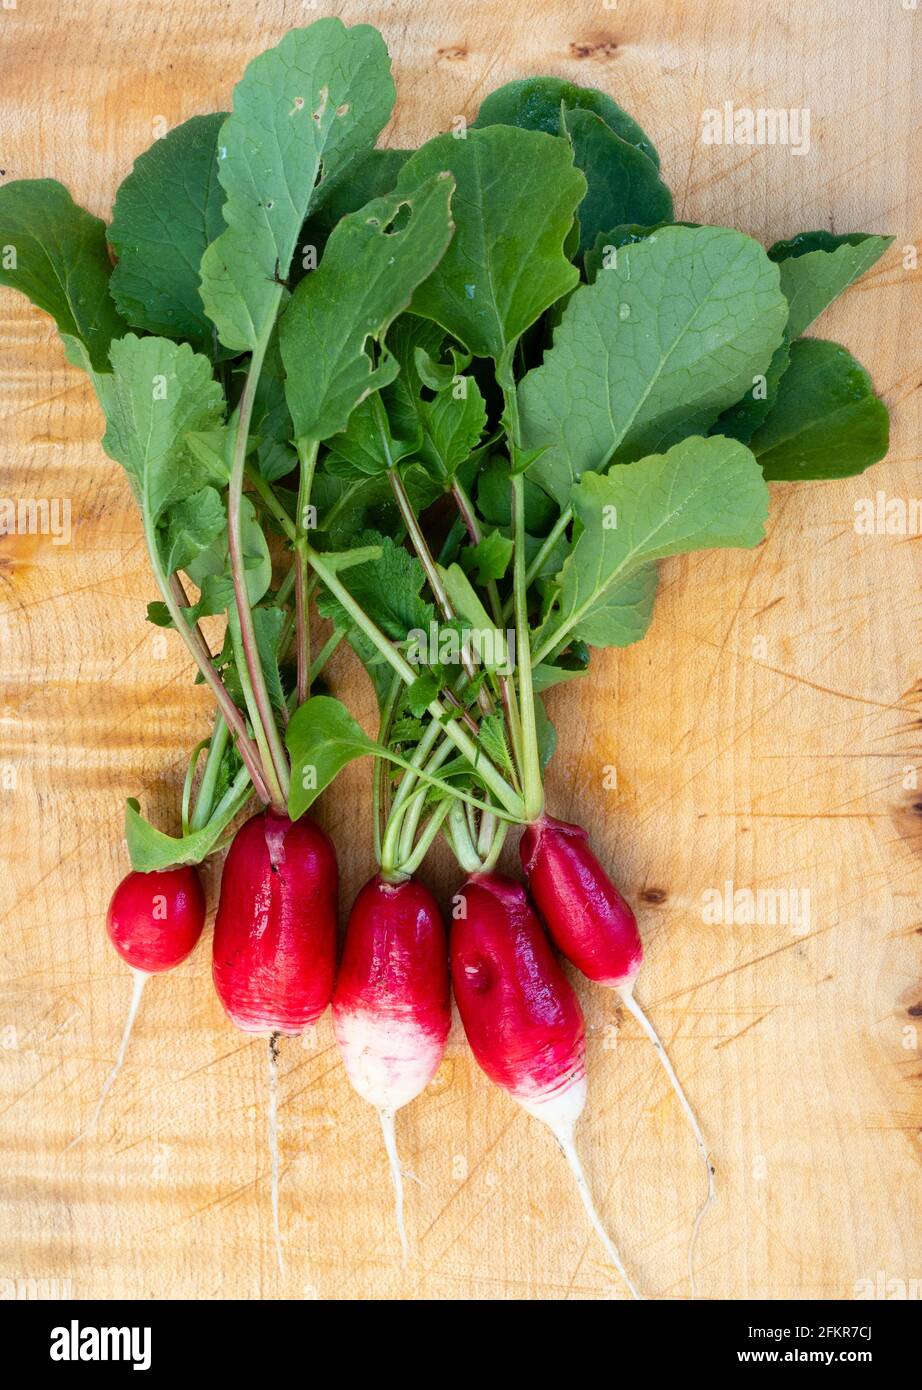 Freshly harvested mid spring organic salad radish 'French Breakfast 3' with roots and tops attached Stock Photo